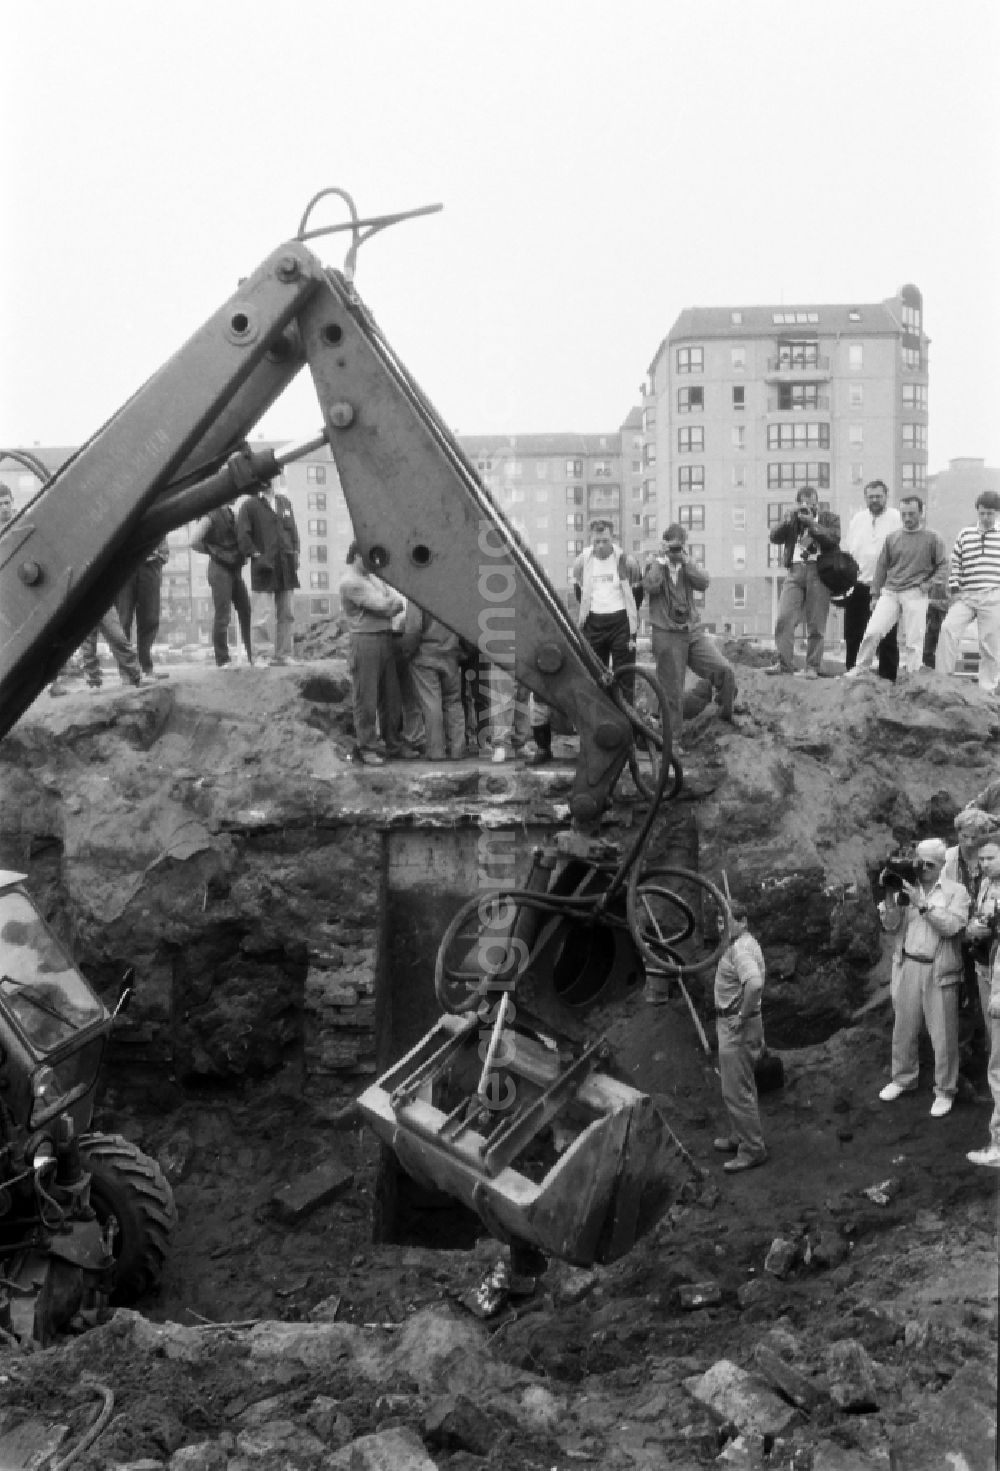 GDR photo archive: Berlin - Civil engineering exposure of the fragments and remains of the concrete bunker systems Fuhrerbunker - Reichskanzlei on Vossstrasse in the district of Mitte in Berlin East Berlin in the area of the former GDR, German Democratic Republic